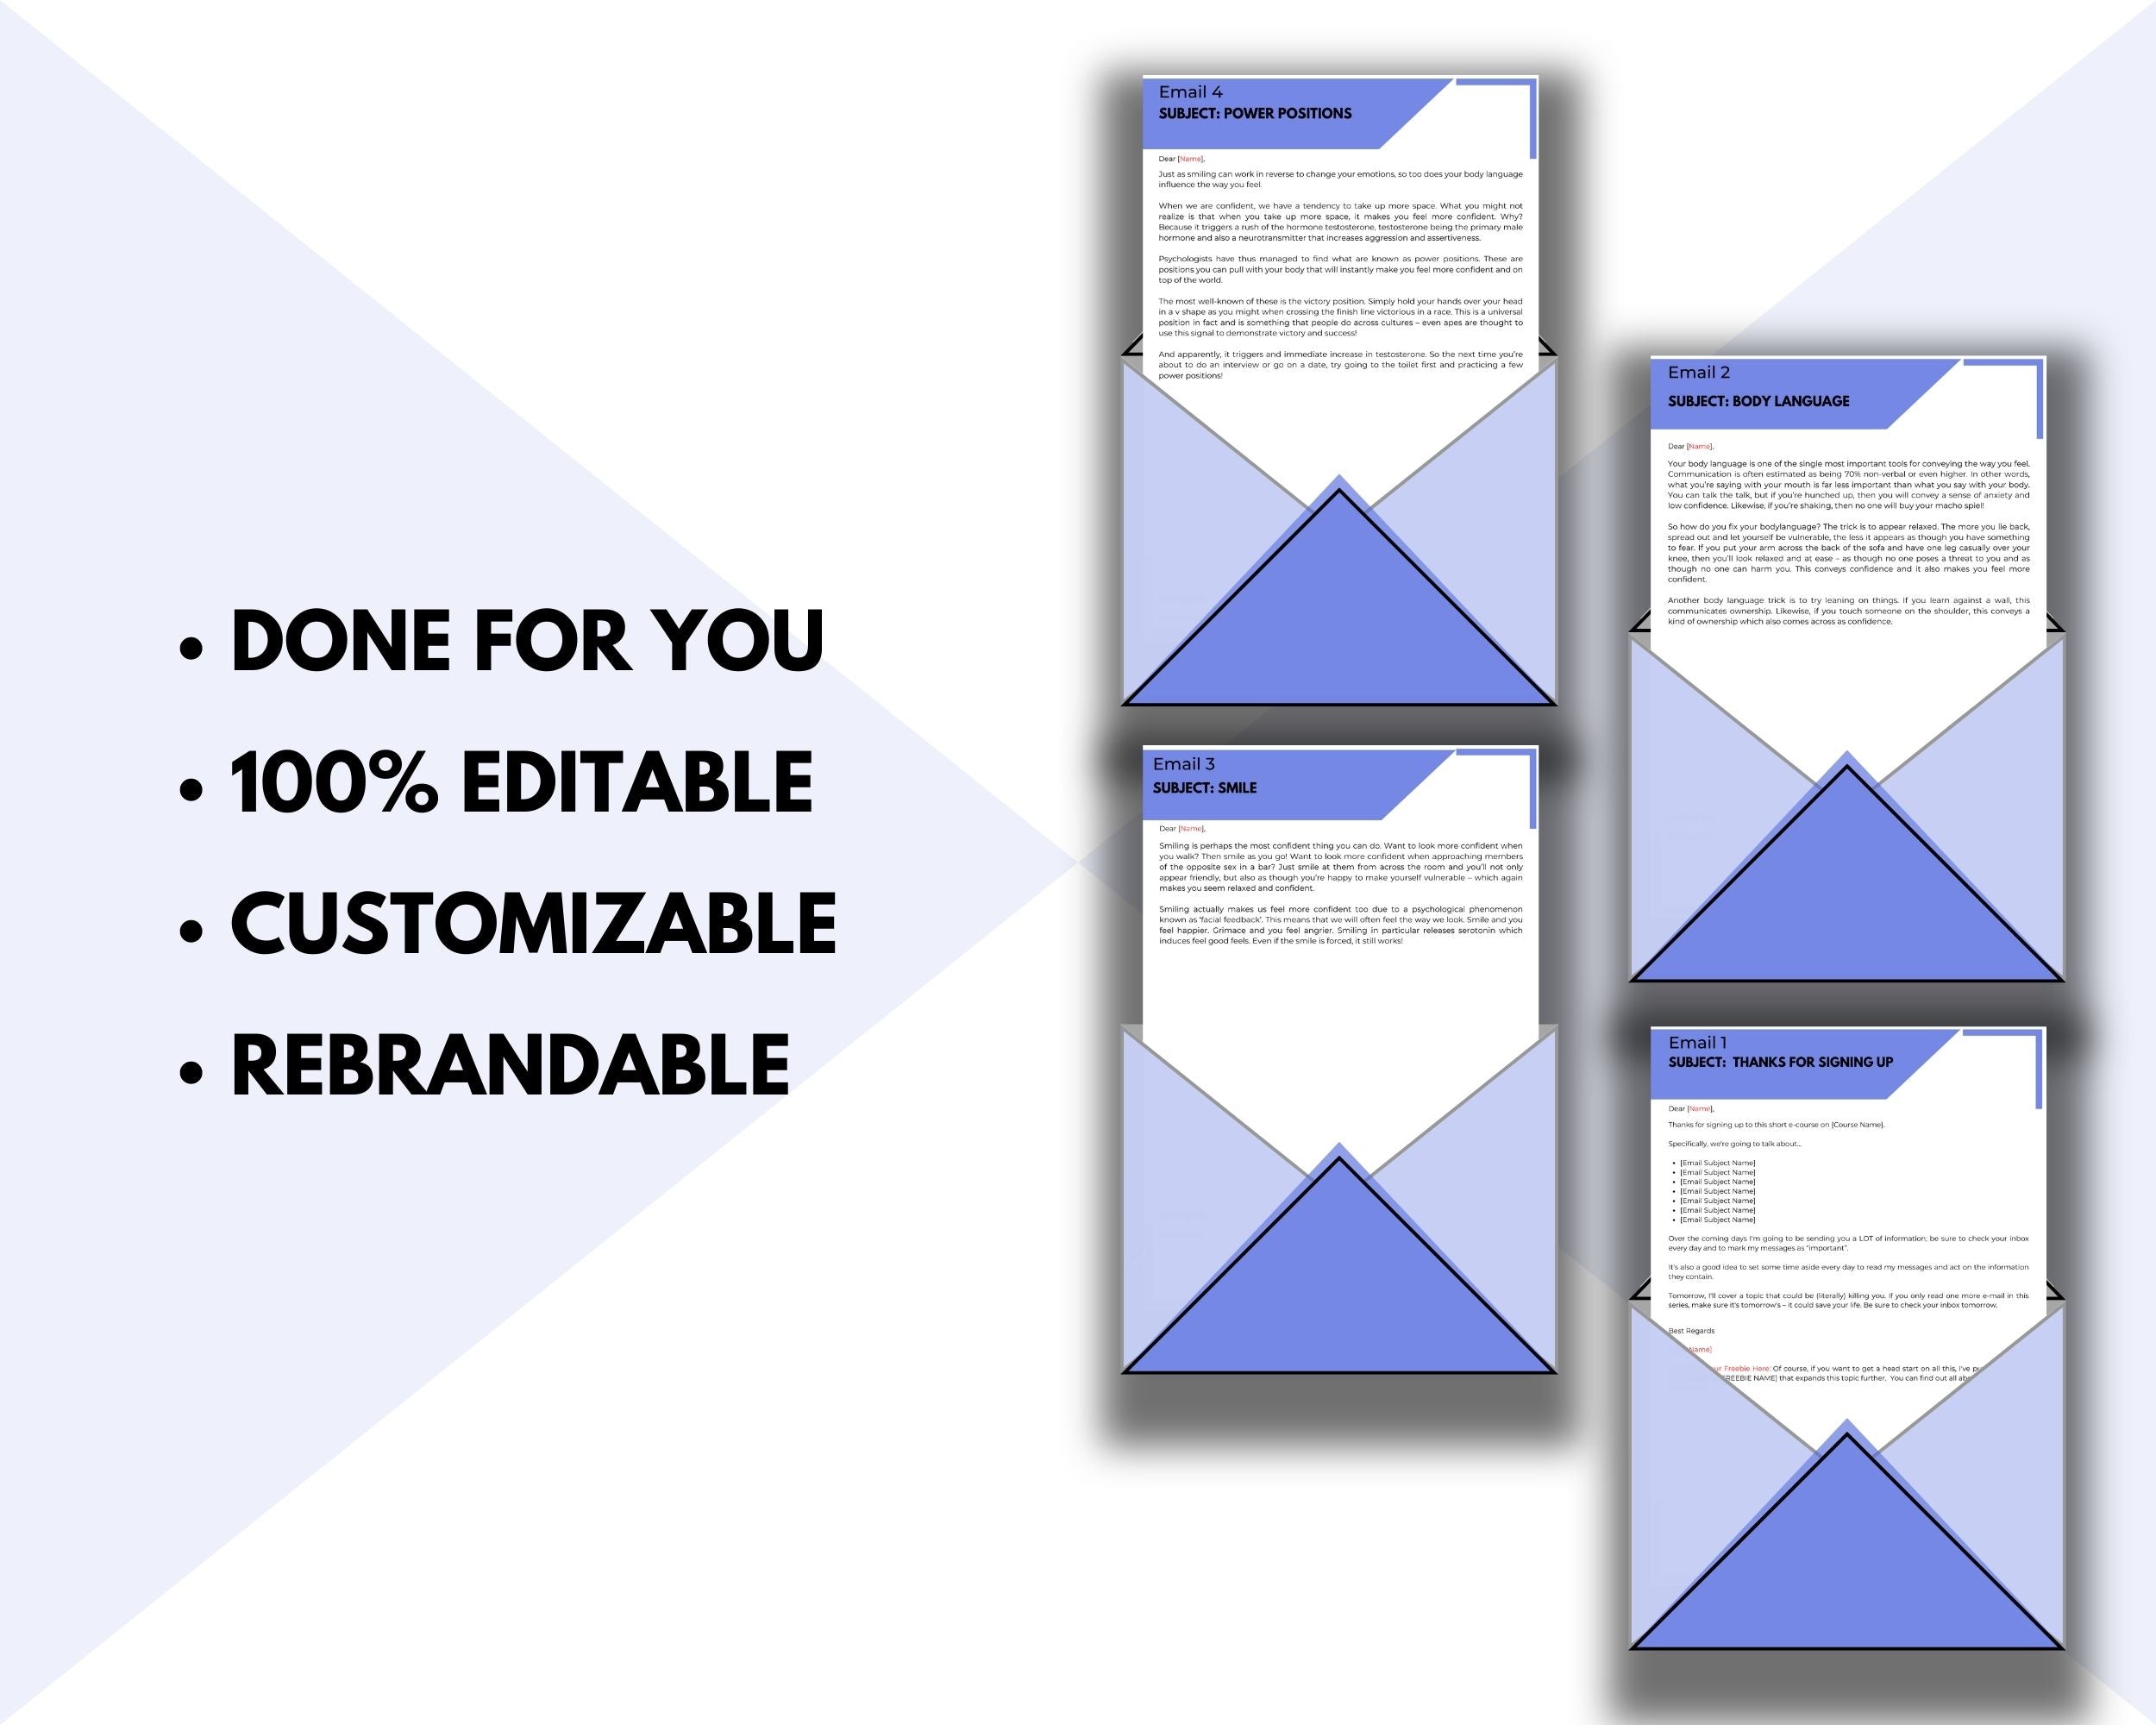 Editable 11 Small Actions To Boost Your Confidence Emails  | Newsletter Template